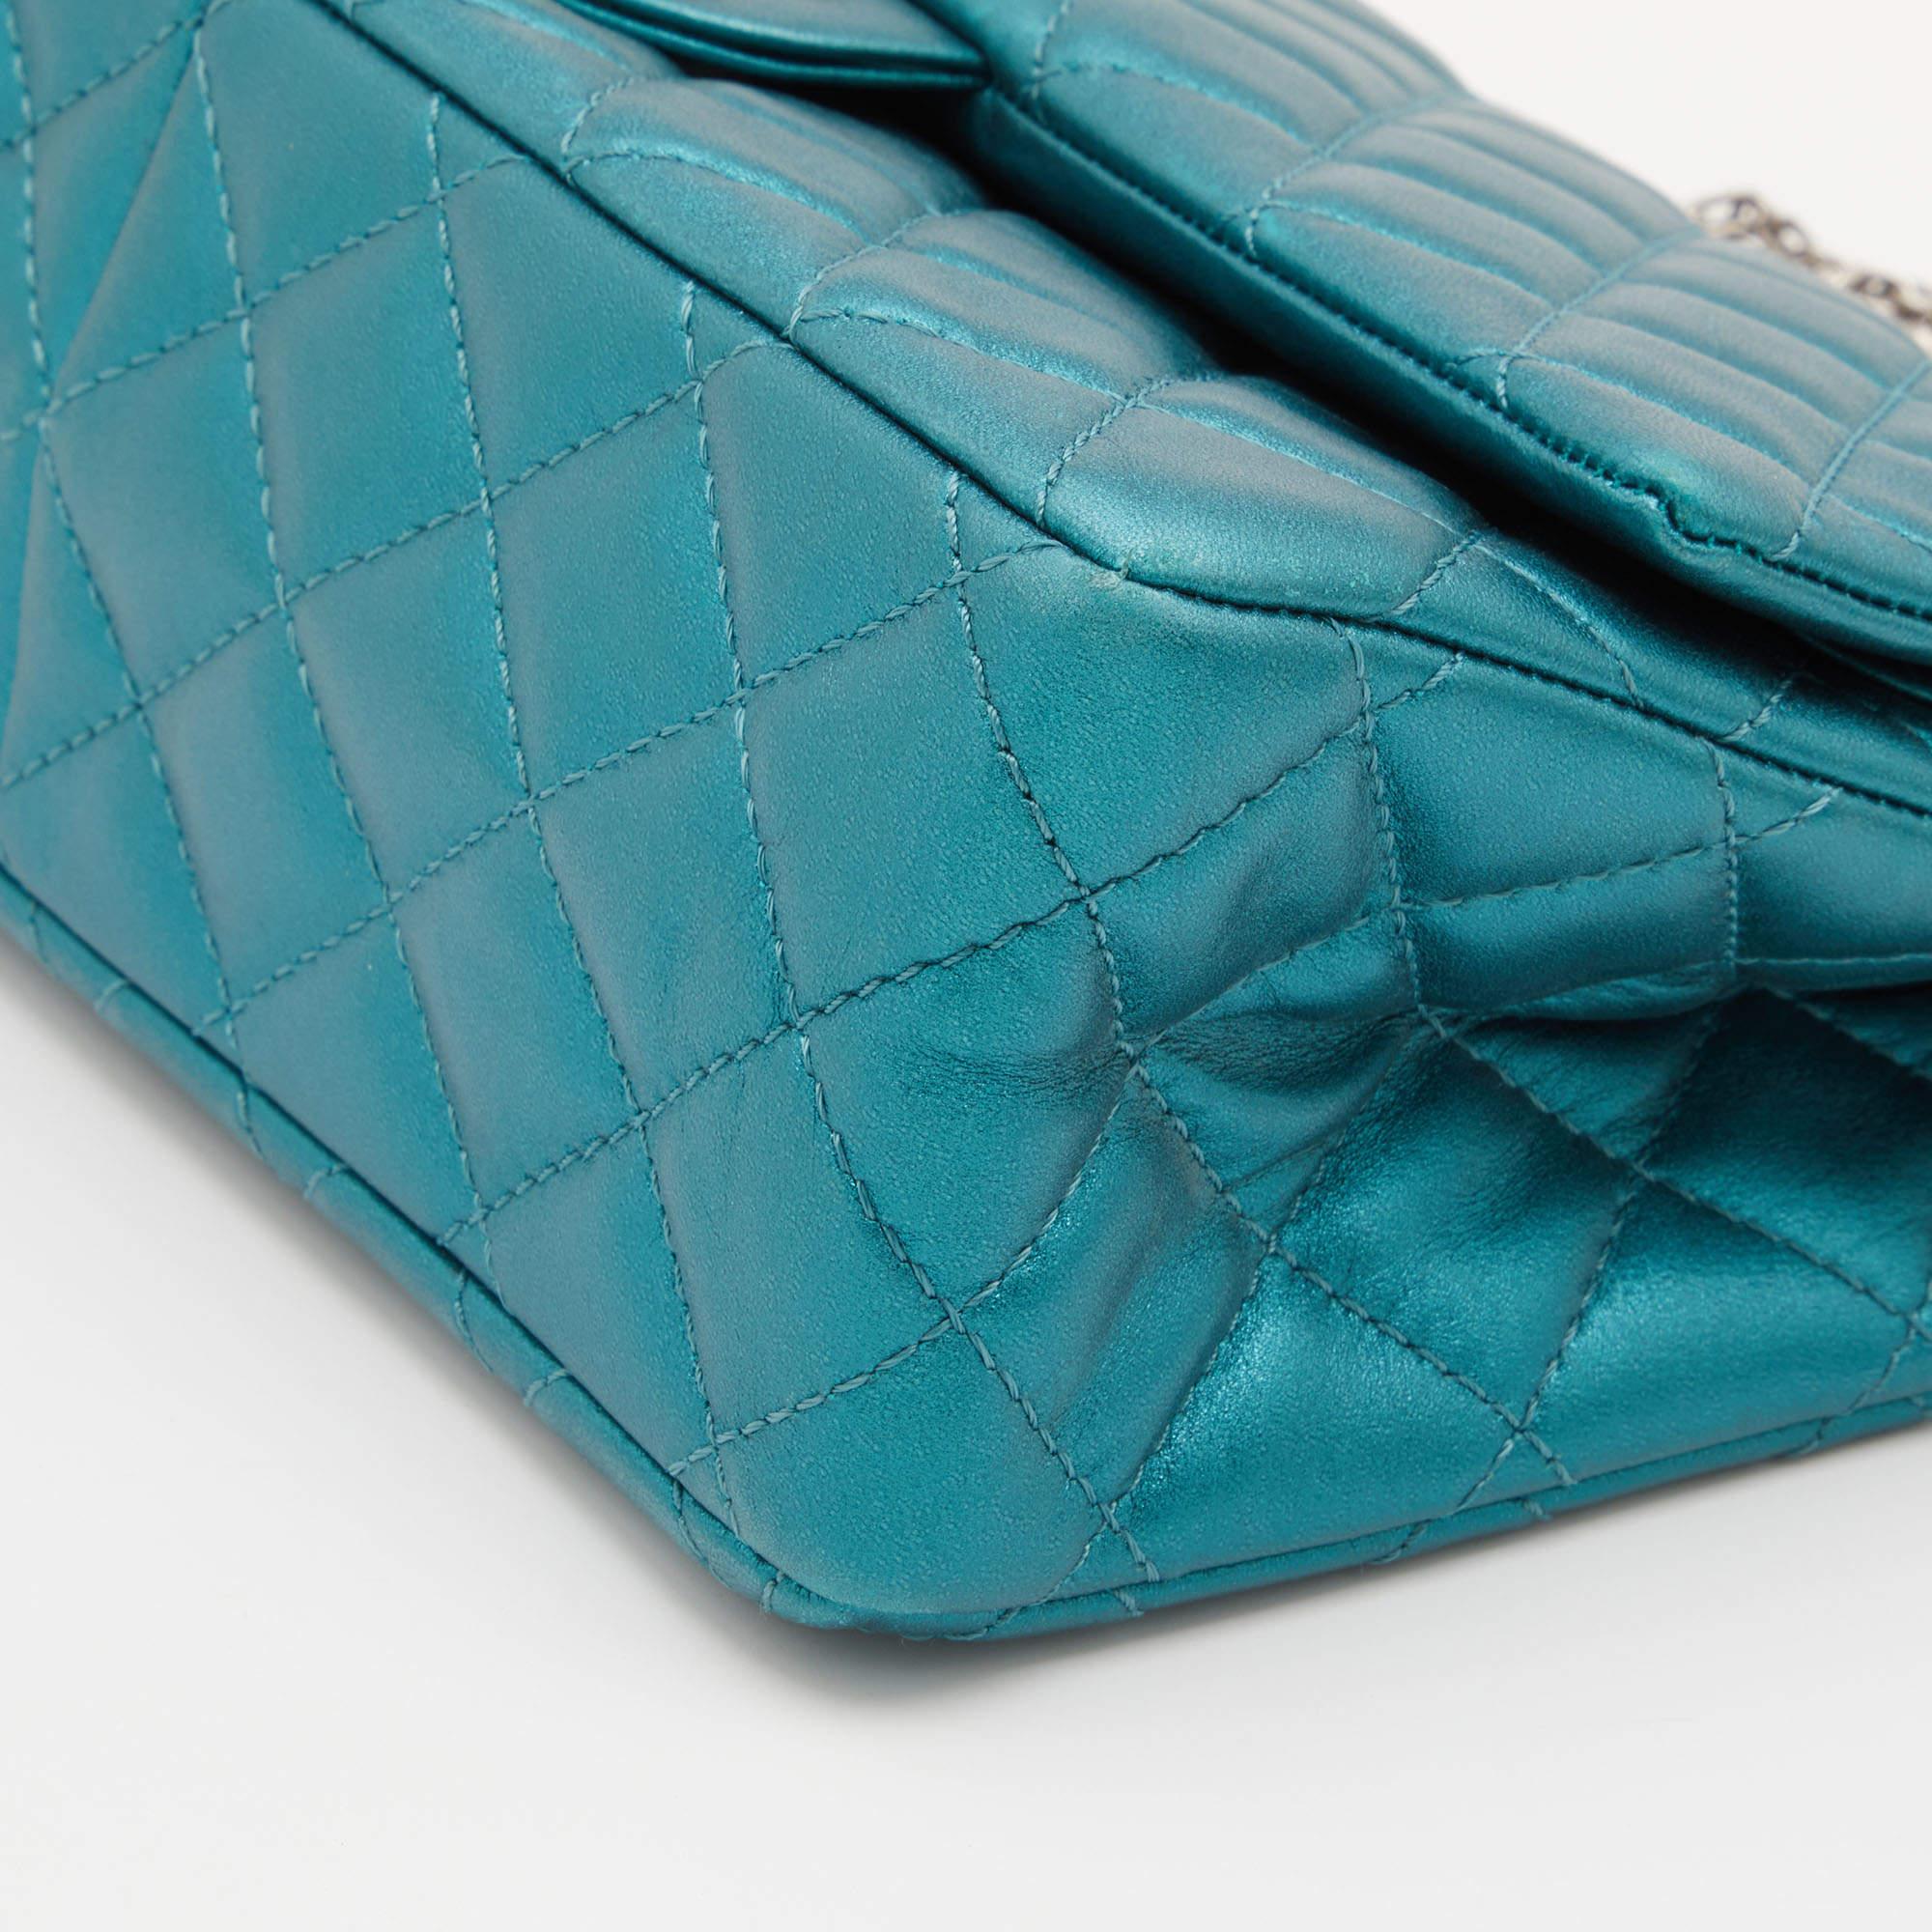 Chanel Metallic Teal Blue Quilted Leather Reissue 2.55 Classic 226 Flap Bag 7